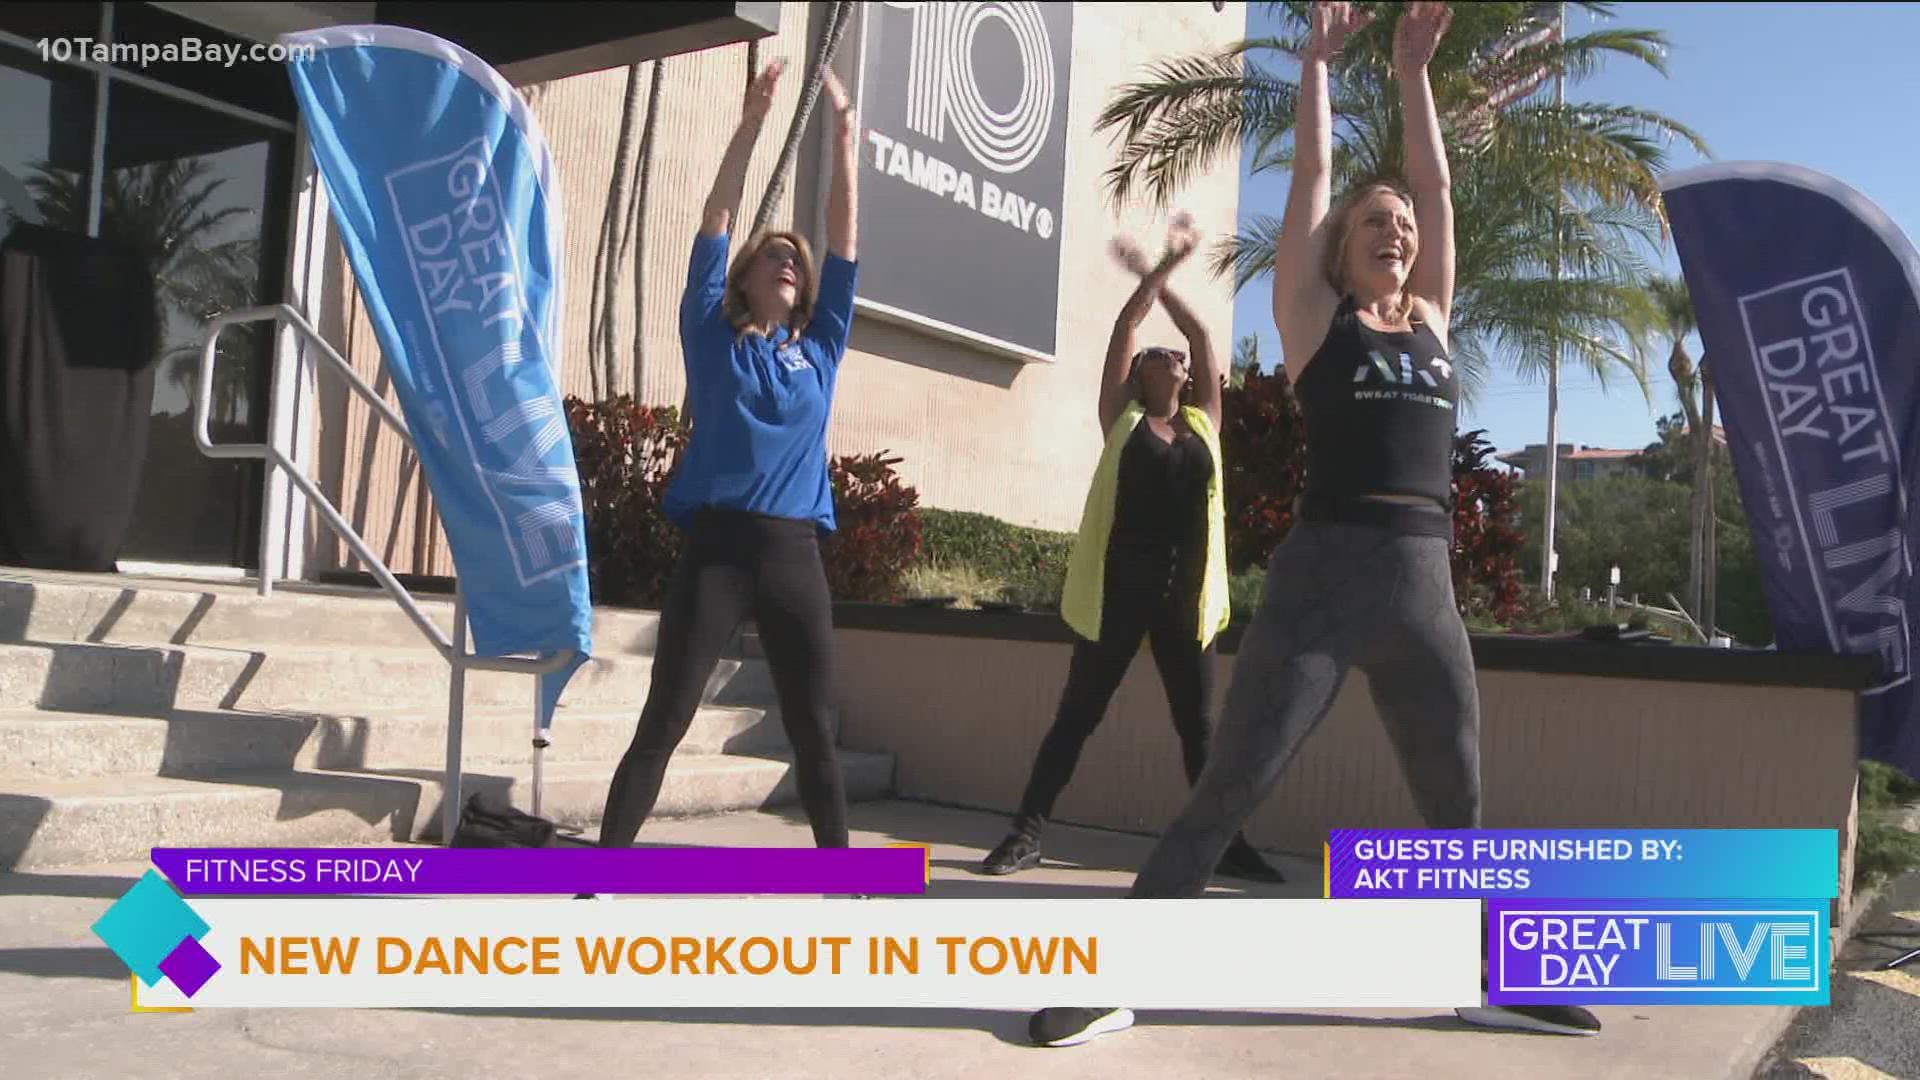 Java and Janelle dance their way to fitness trying out new workout AKT.